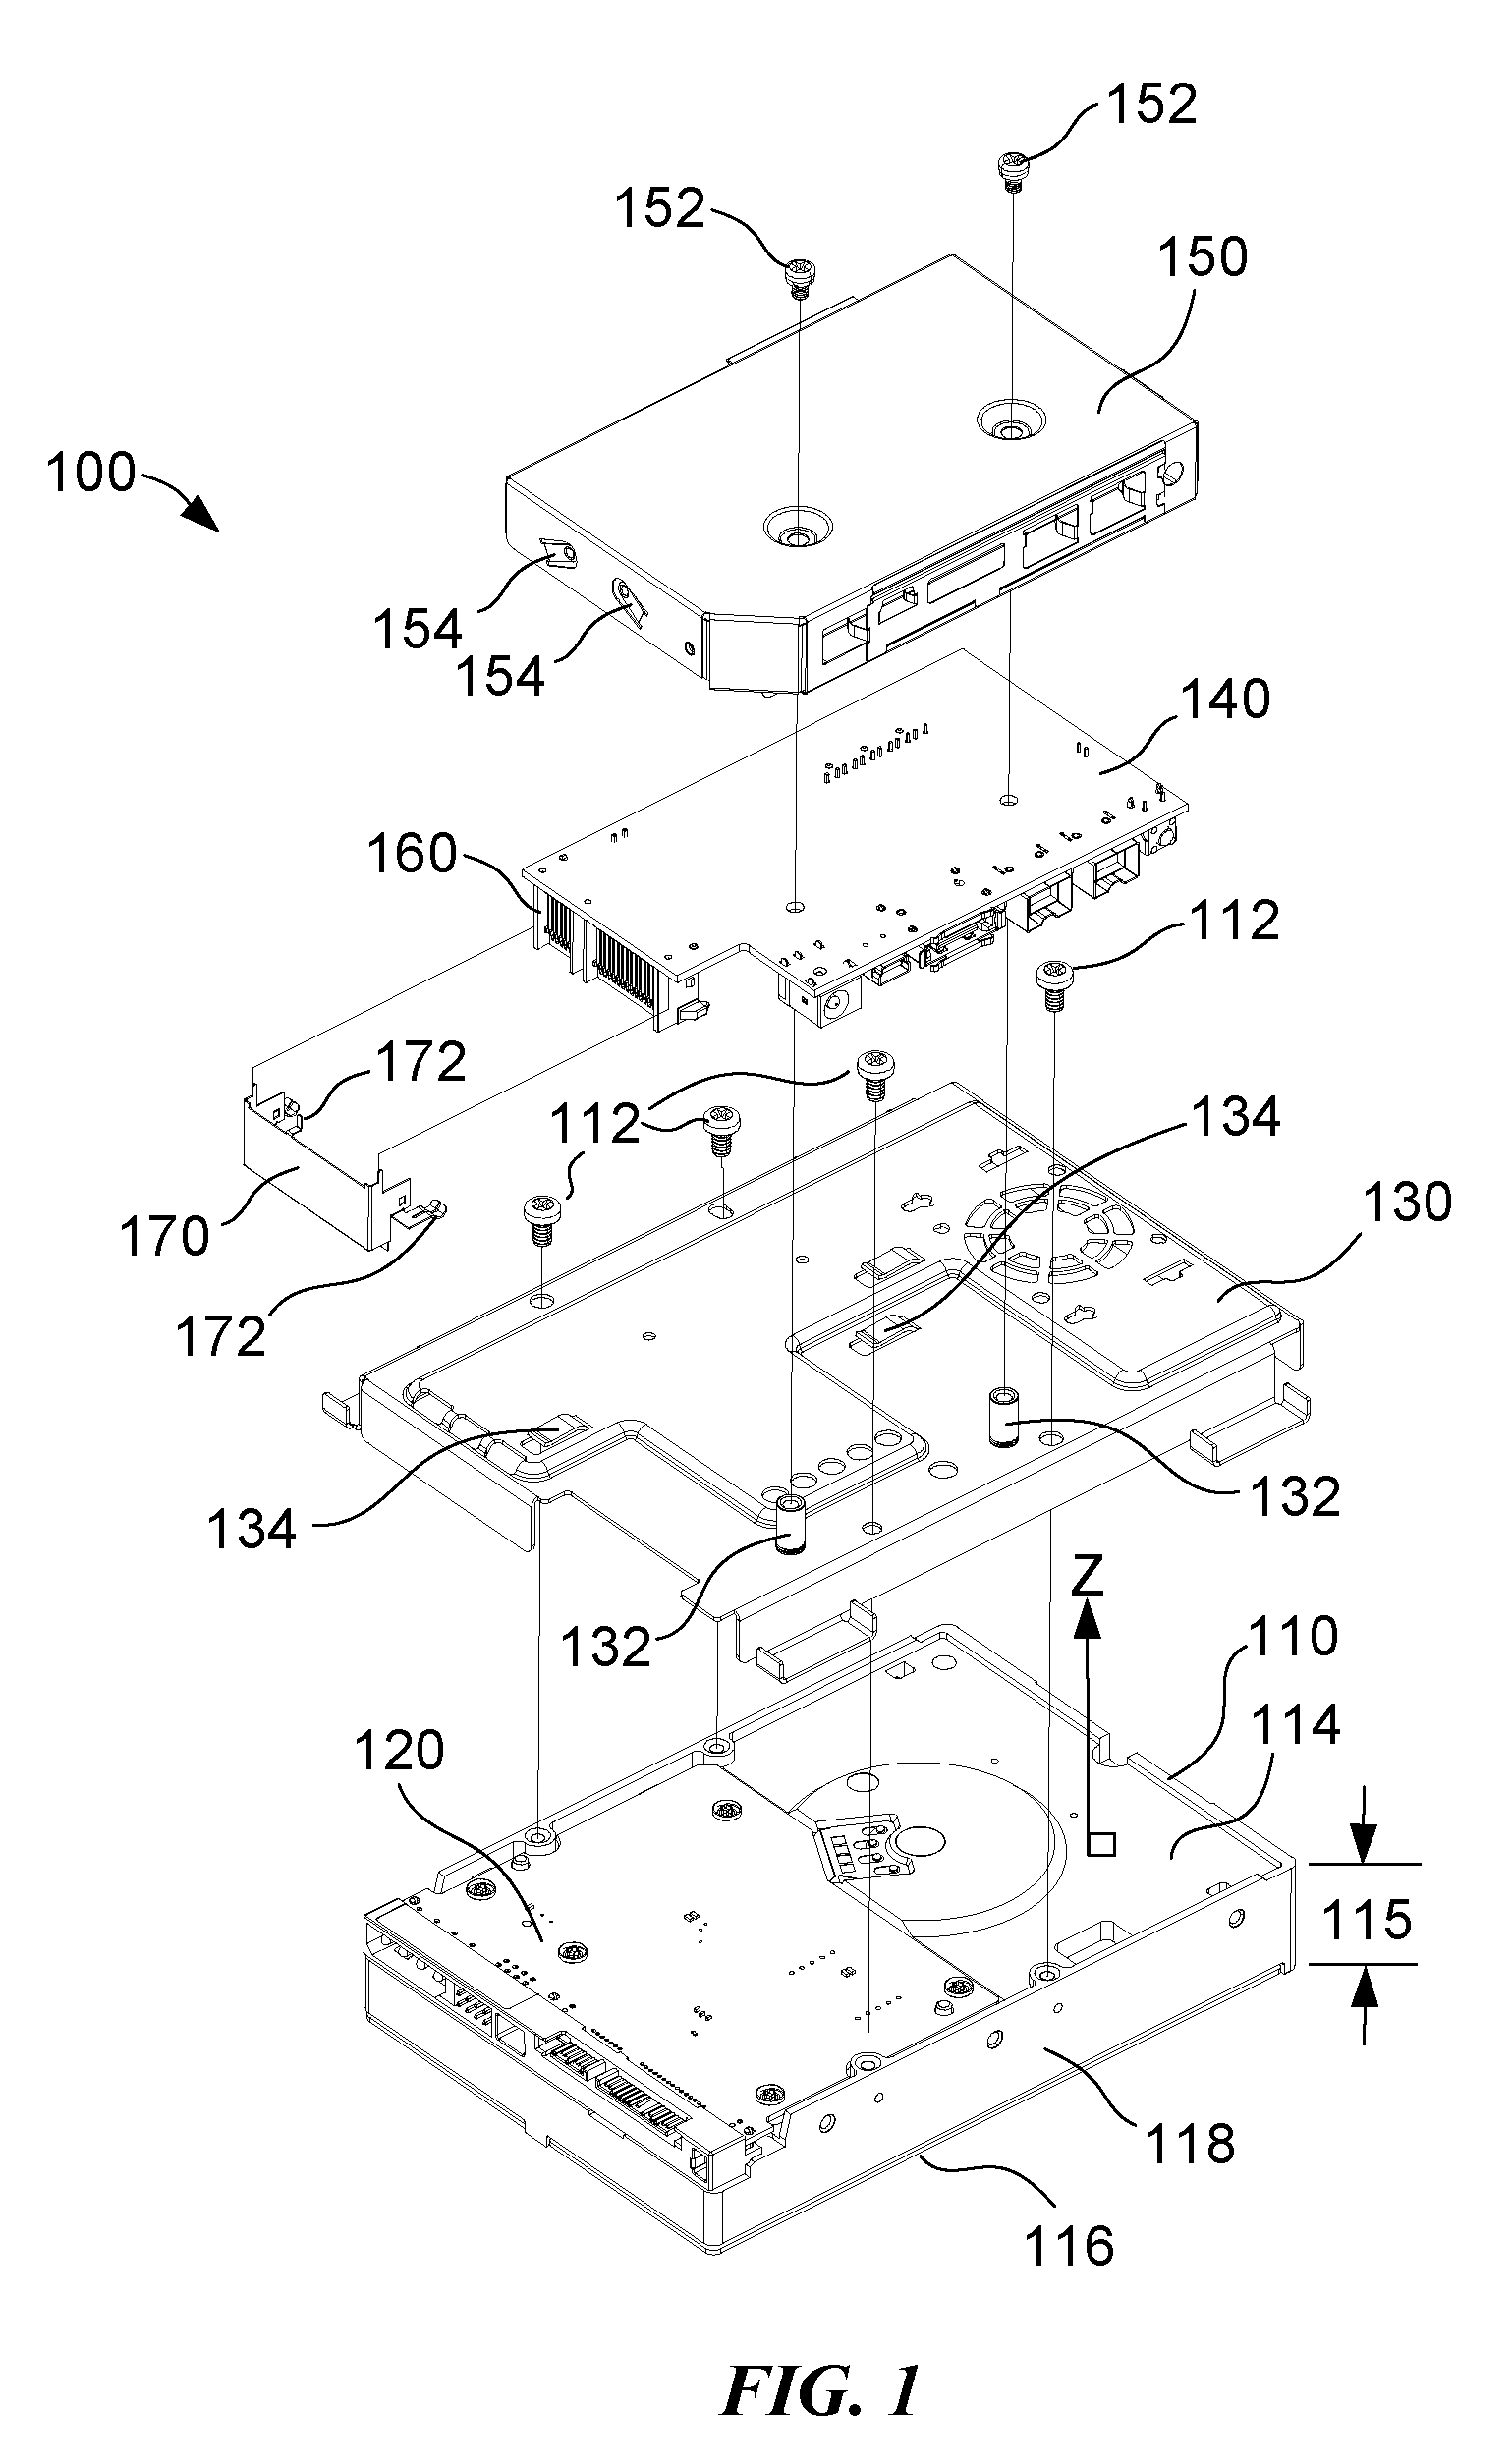 Information storage device with a bridge controller and a plurality of electrically coupled conductive shields